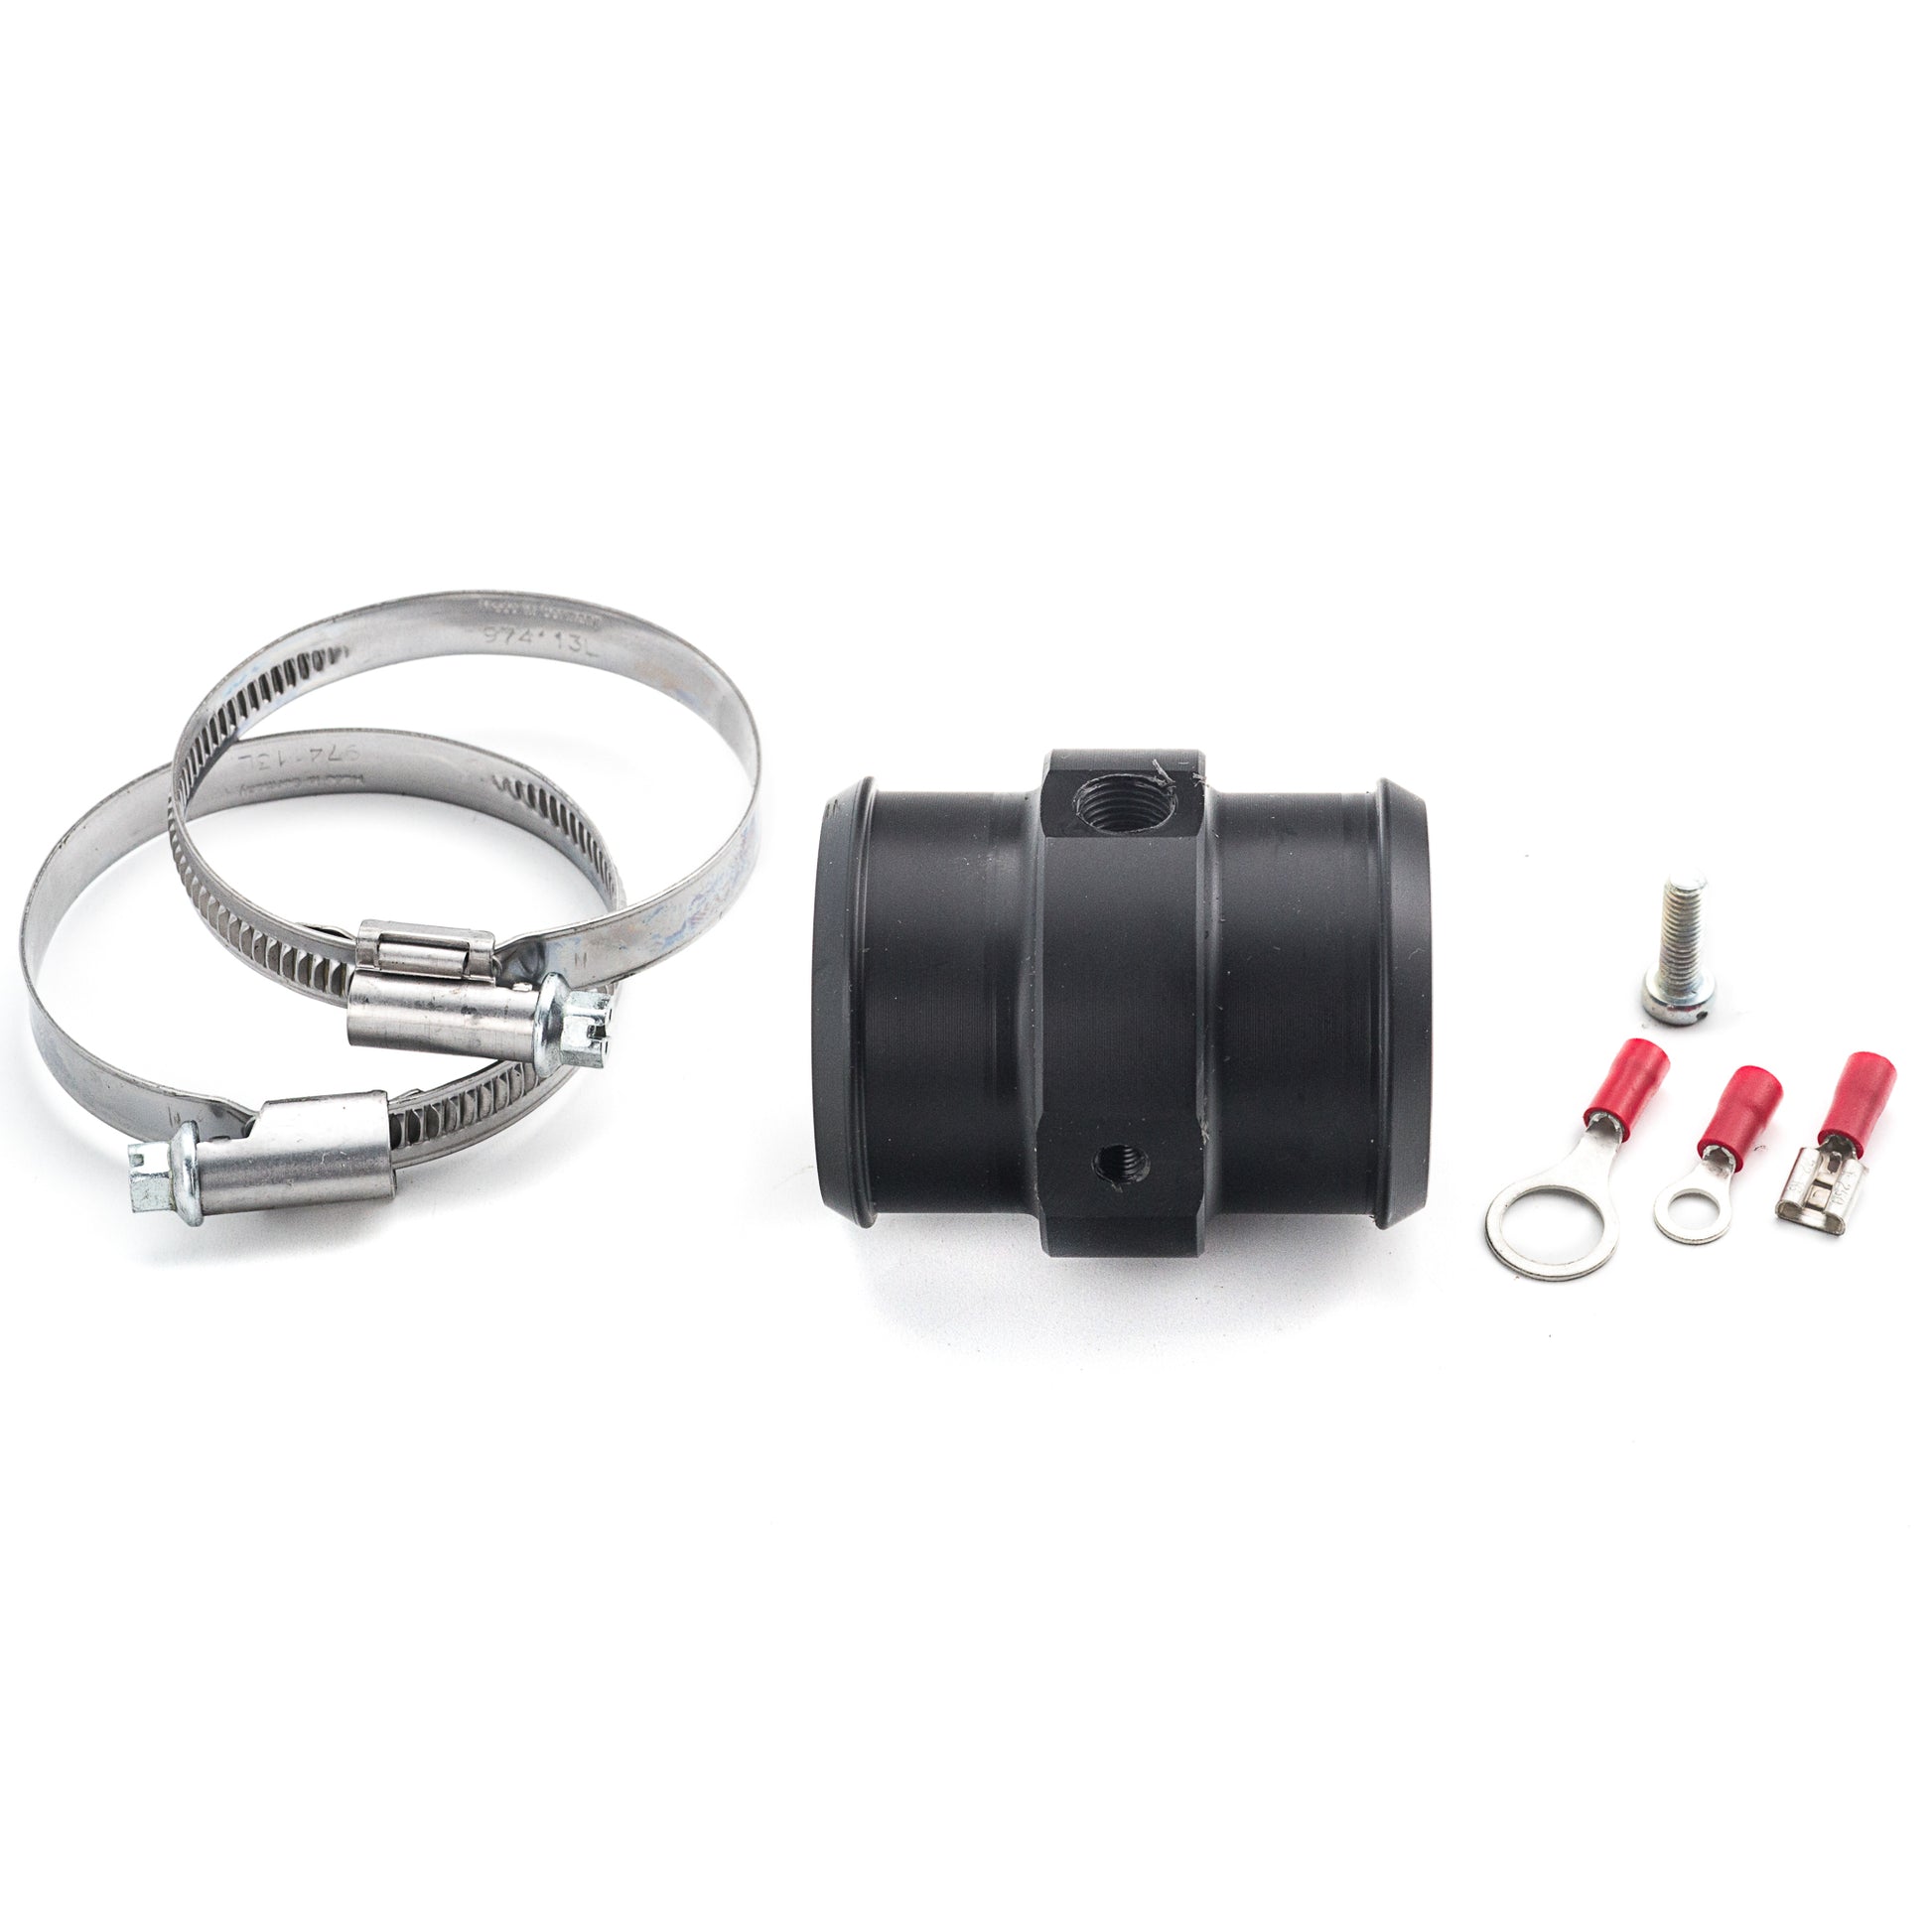 42mm (1.65") Coolant Hose Adapter for Coolant Temperature and Level Measurements